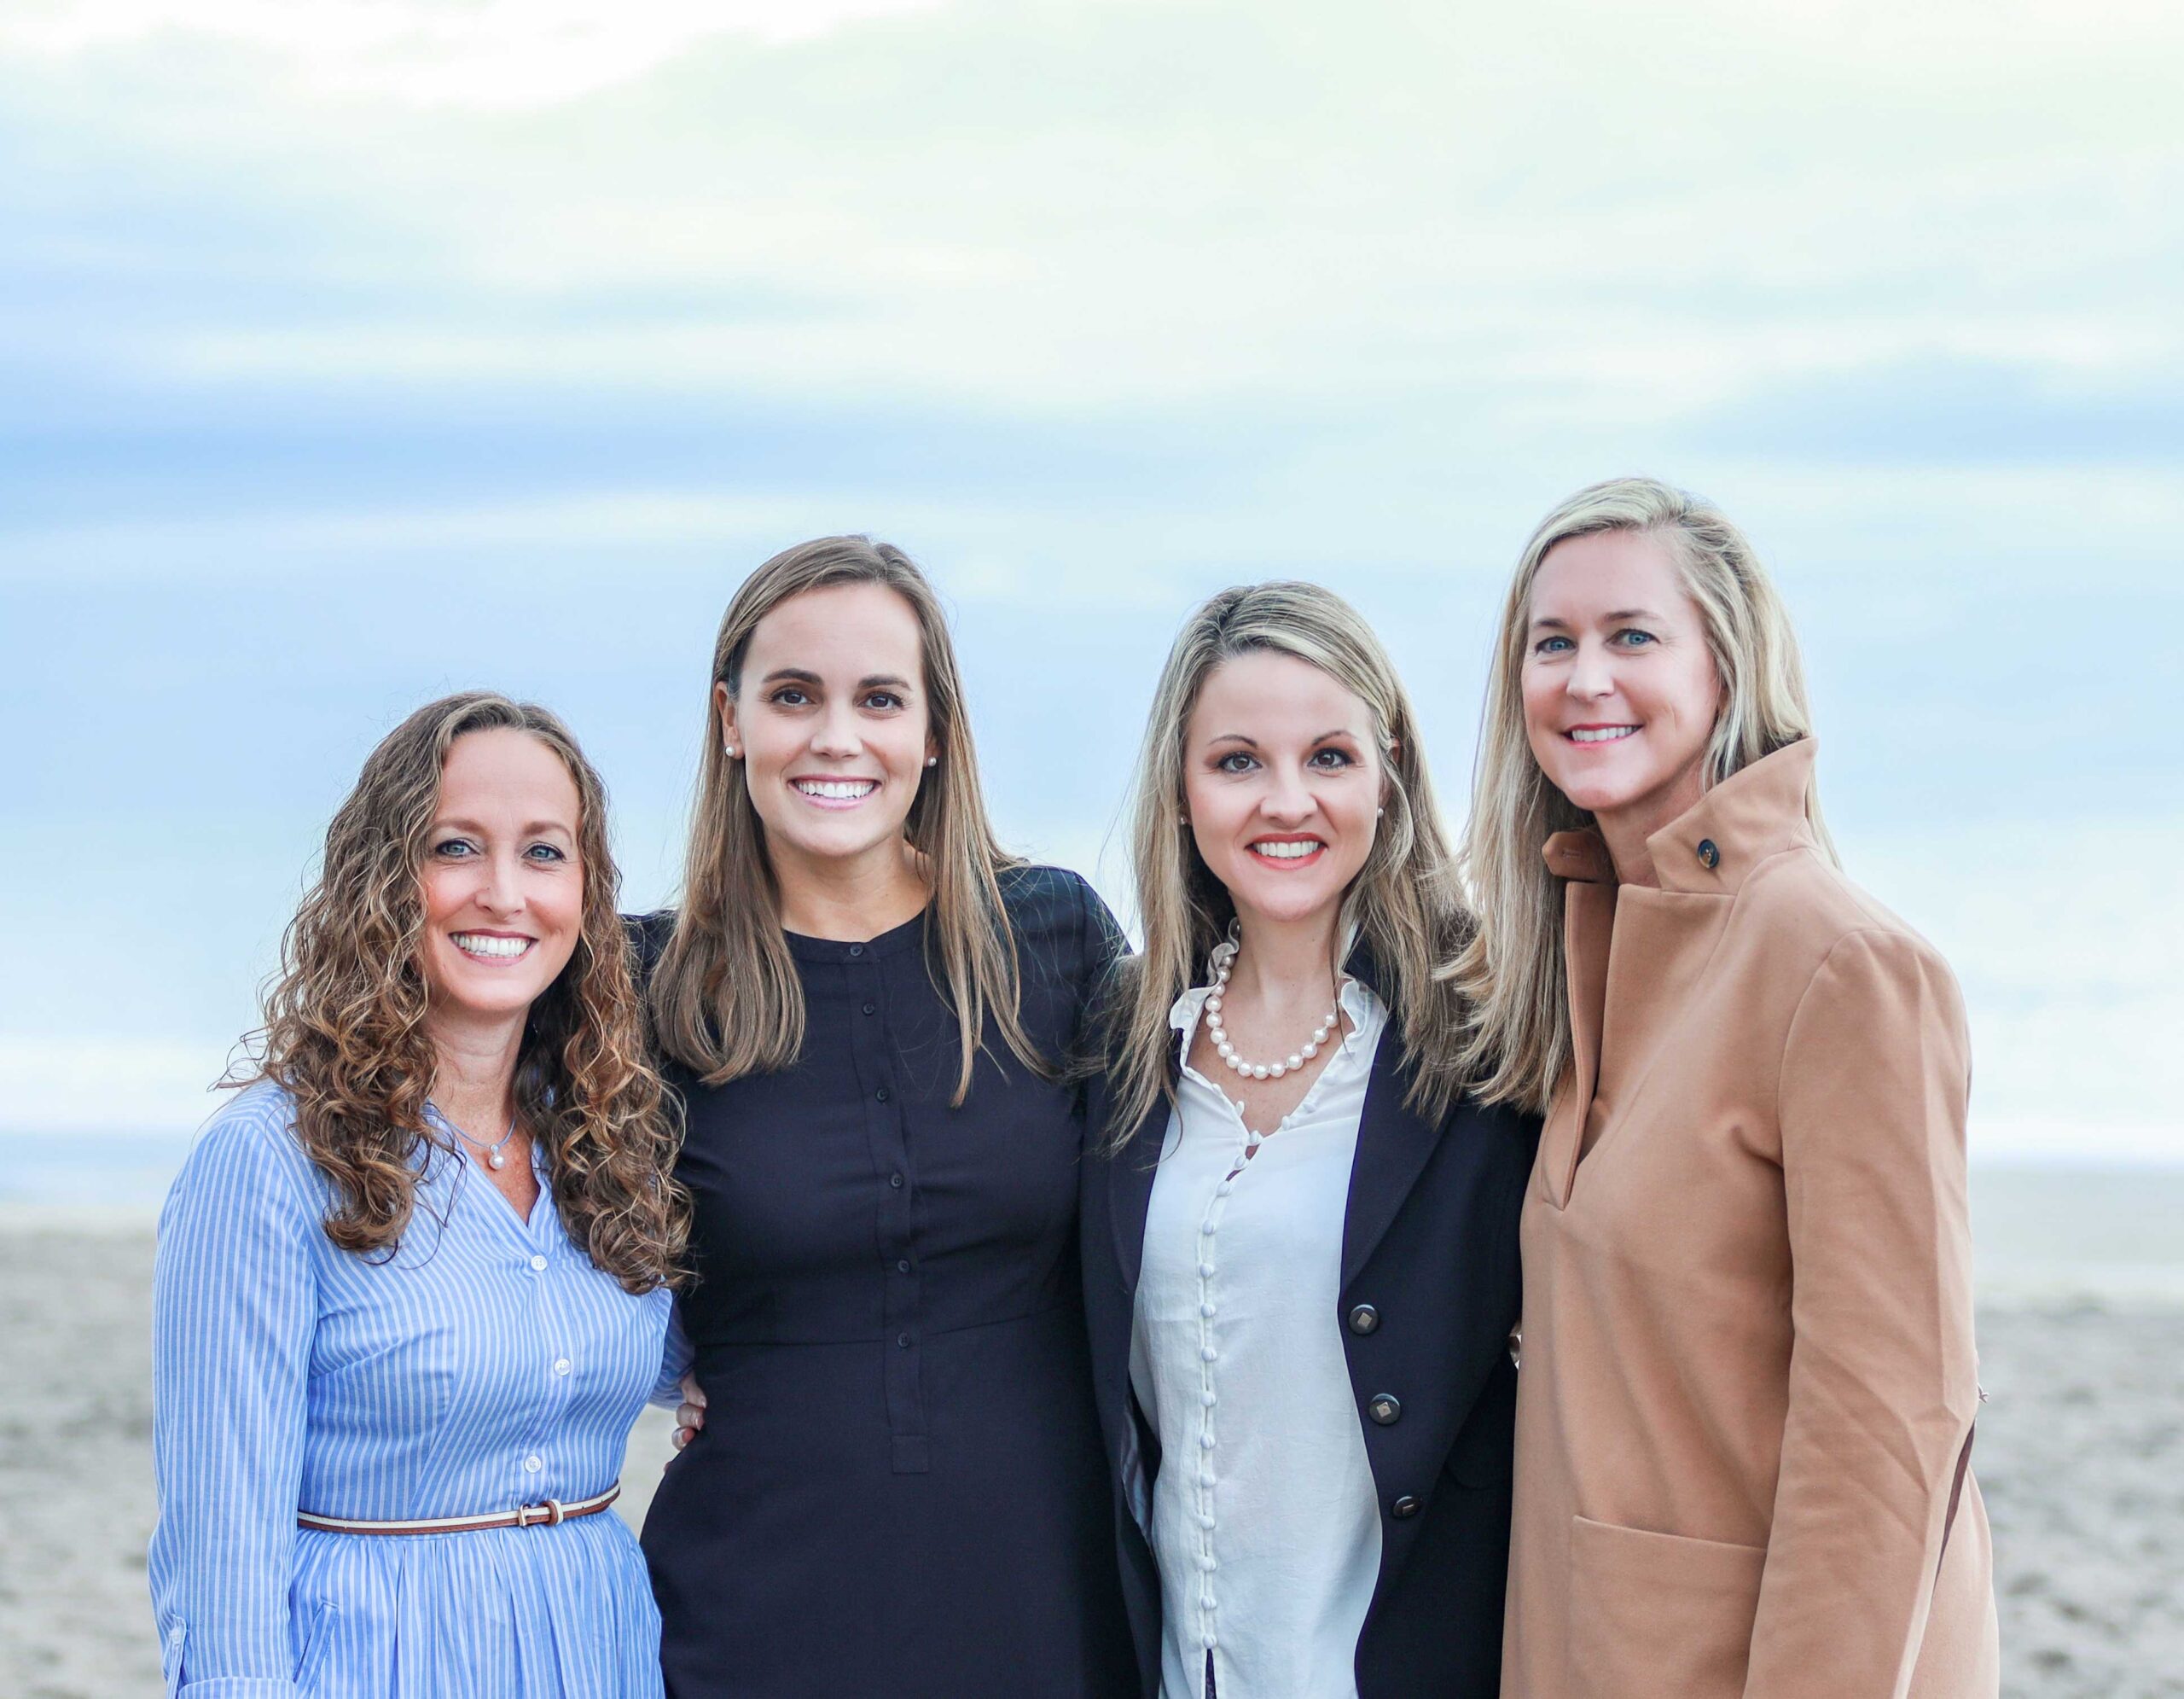 Pictured above from left to right: Dr. Christina Namvar, Meredith Kitchell PA-C, Dr. Kristy Crawford, and Dr. Lindsey Bruce